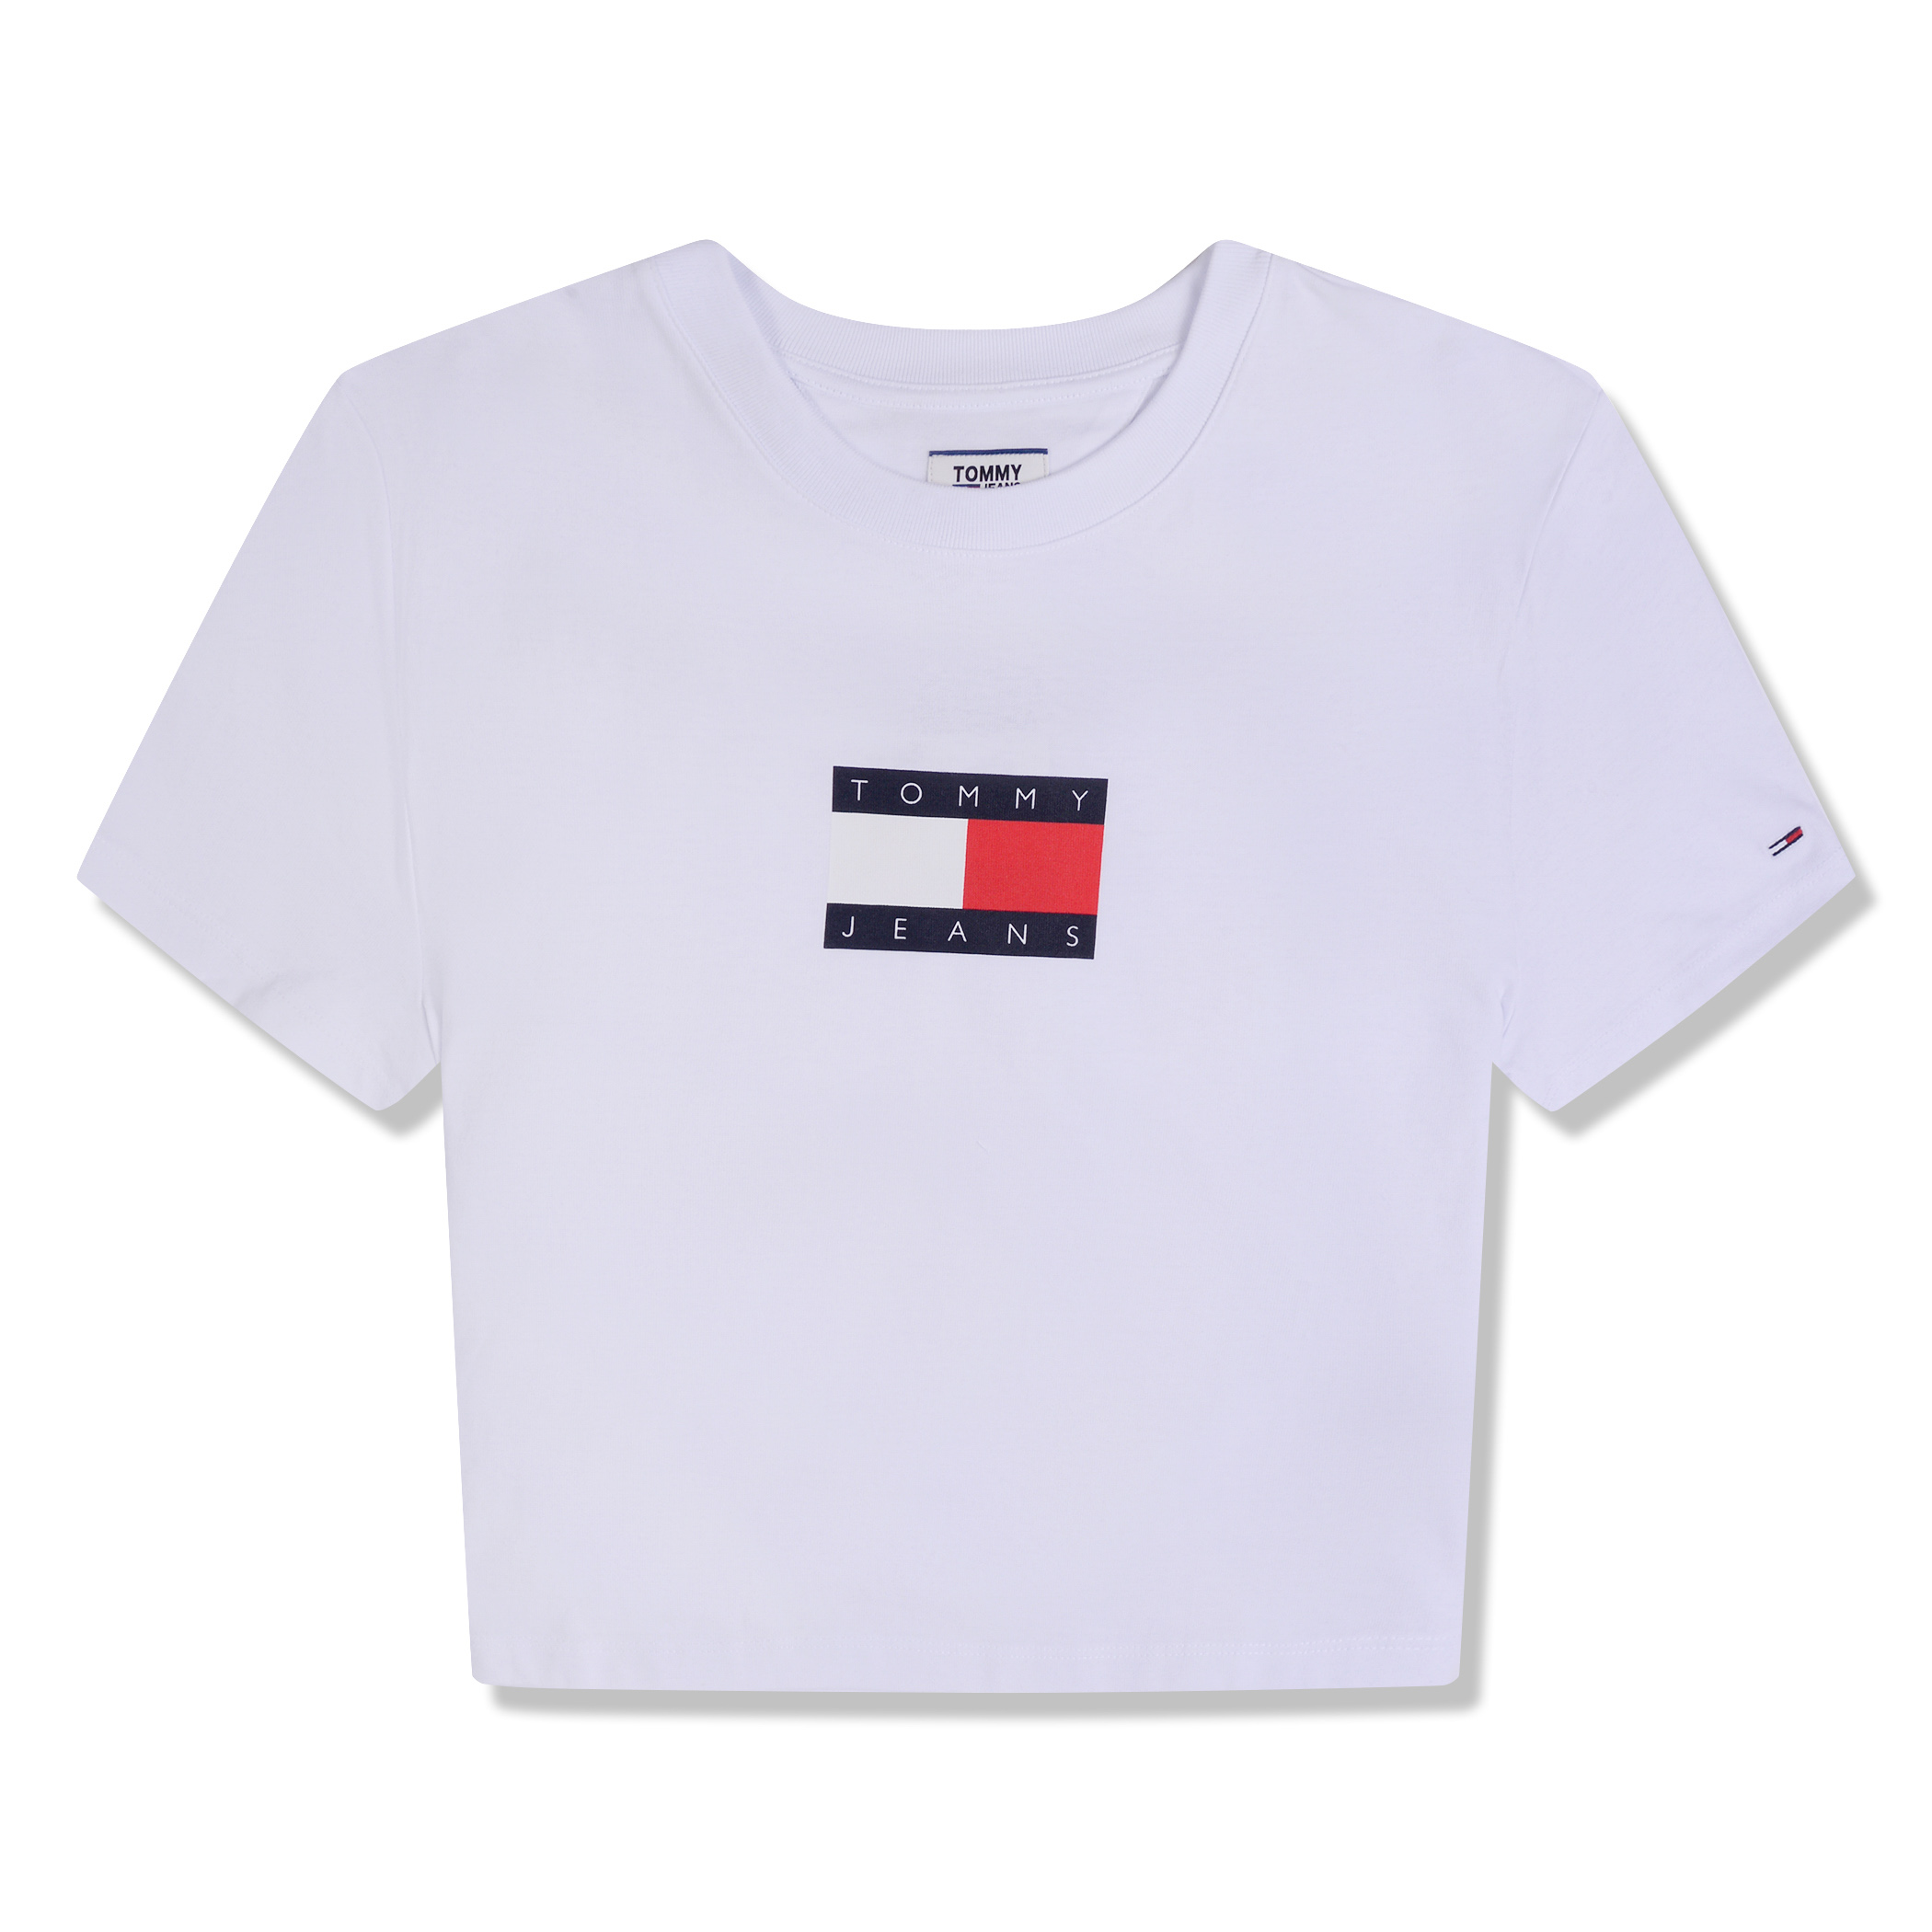 tommy jeans flag shirt